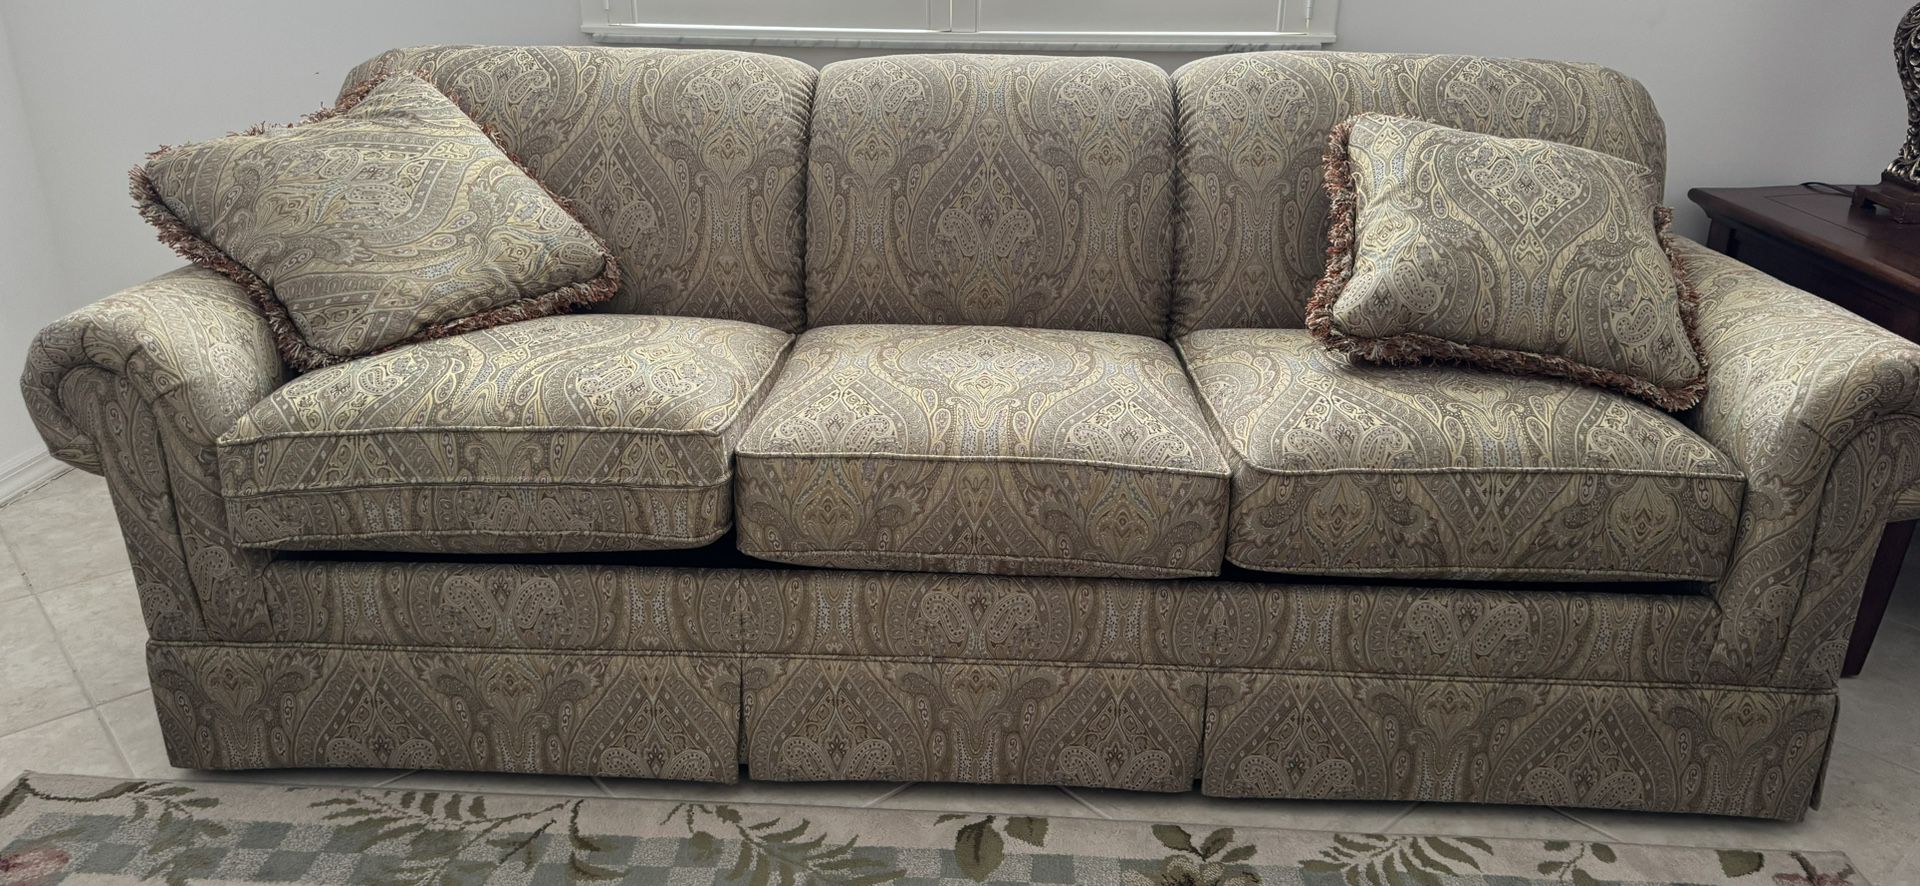 Sofa Sleeper Queen Size Bed By Thomasville